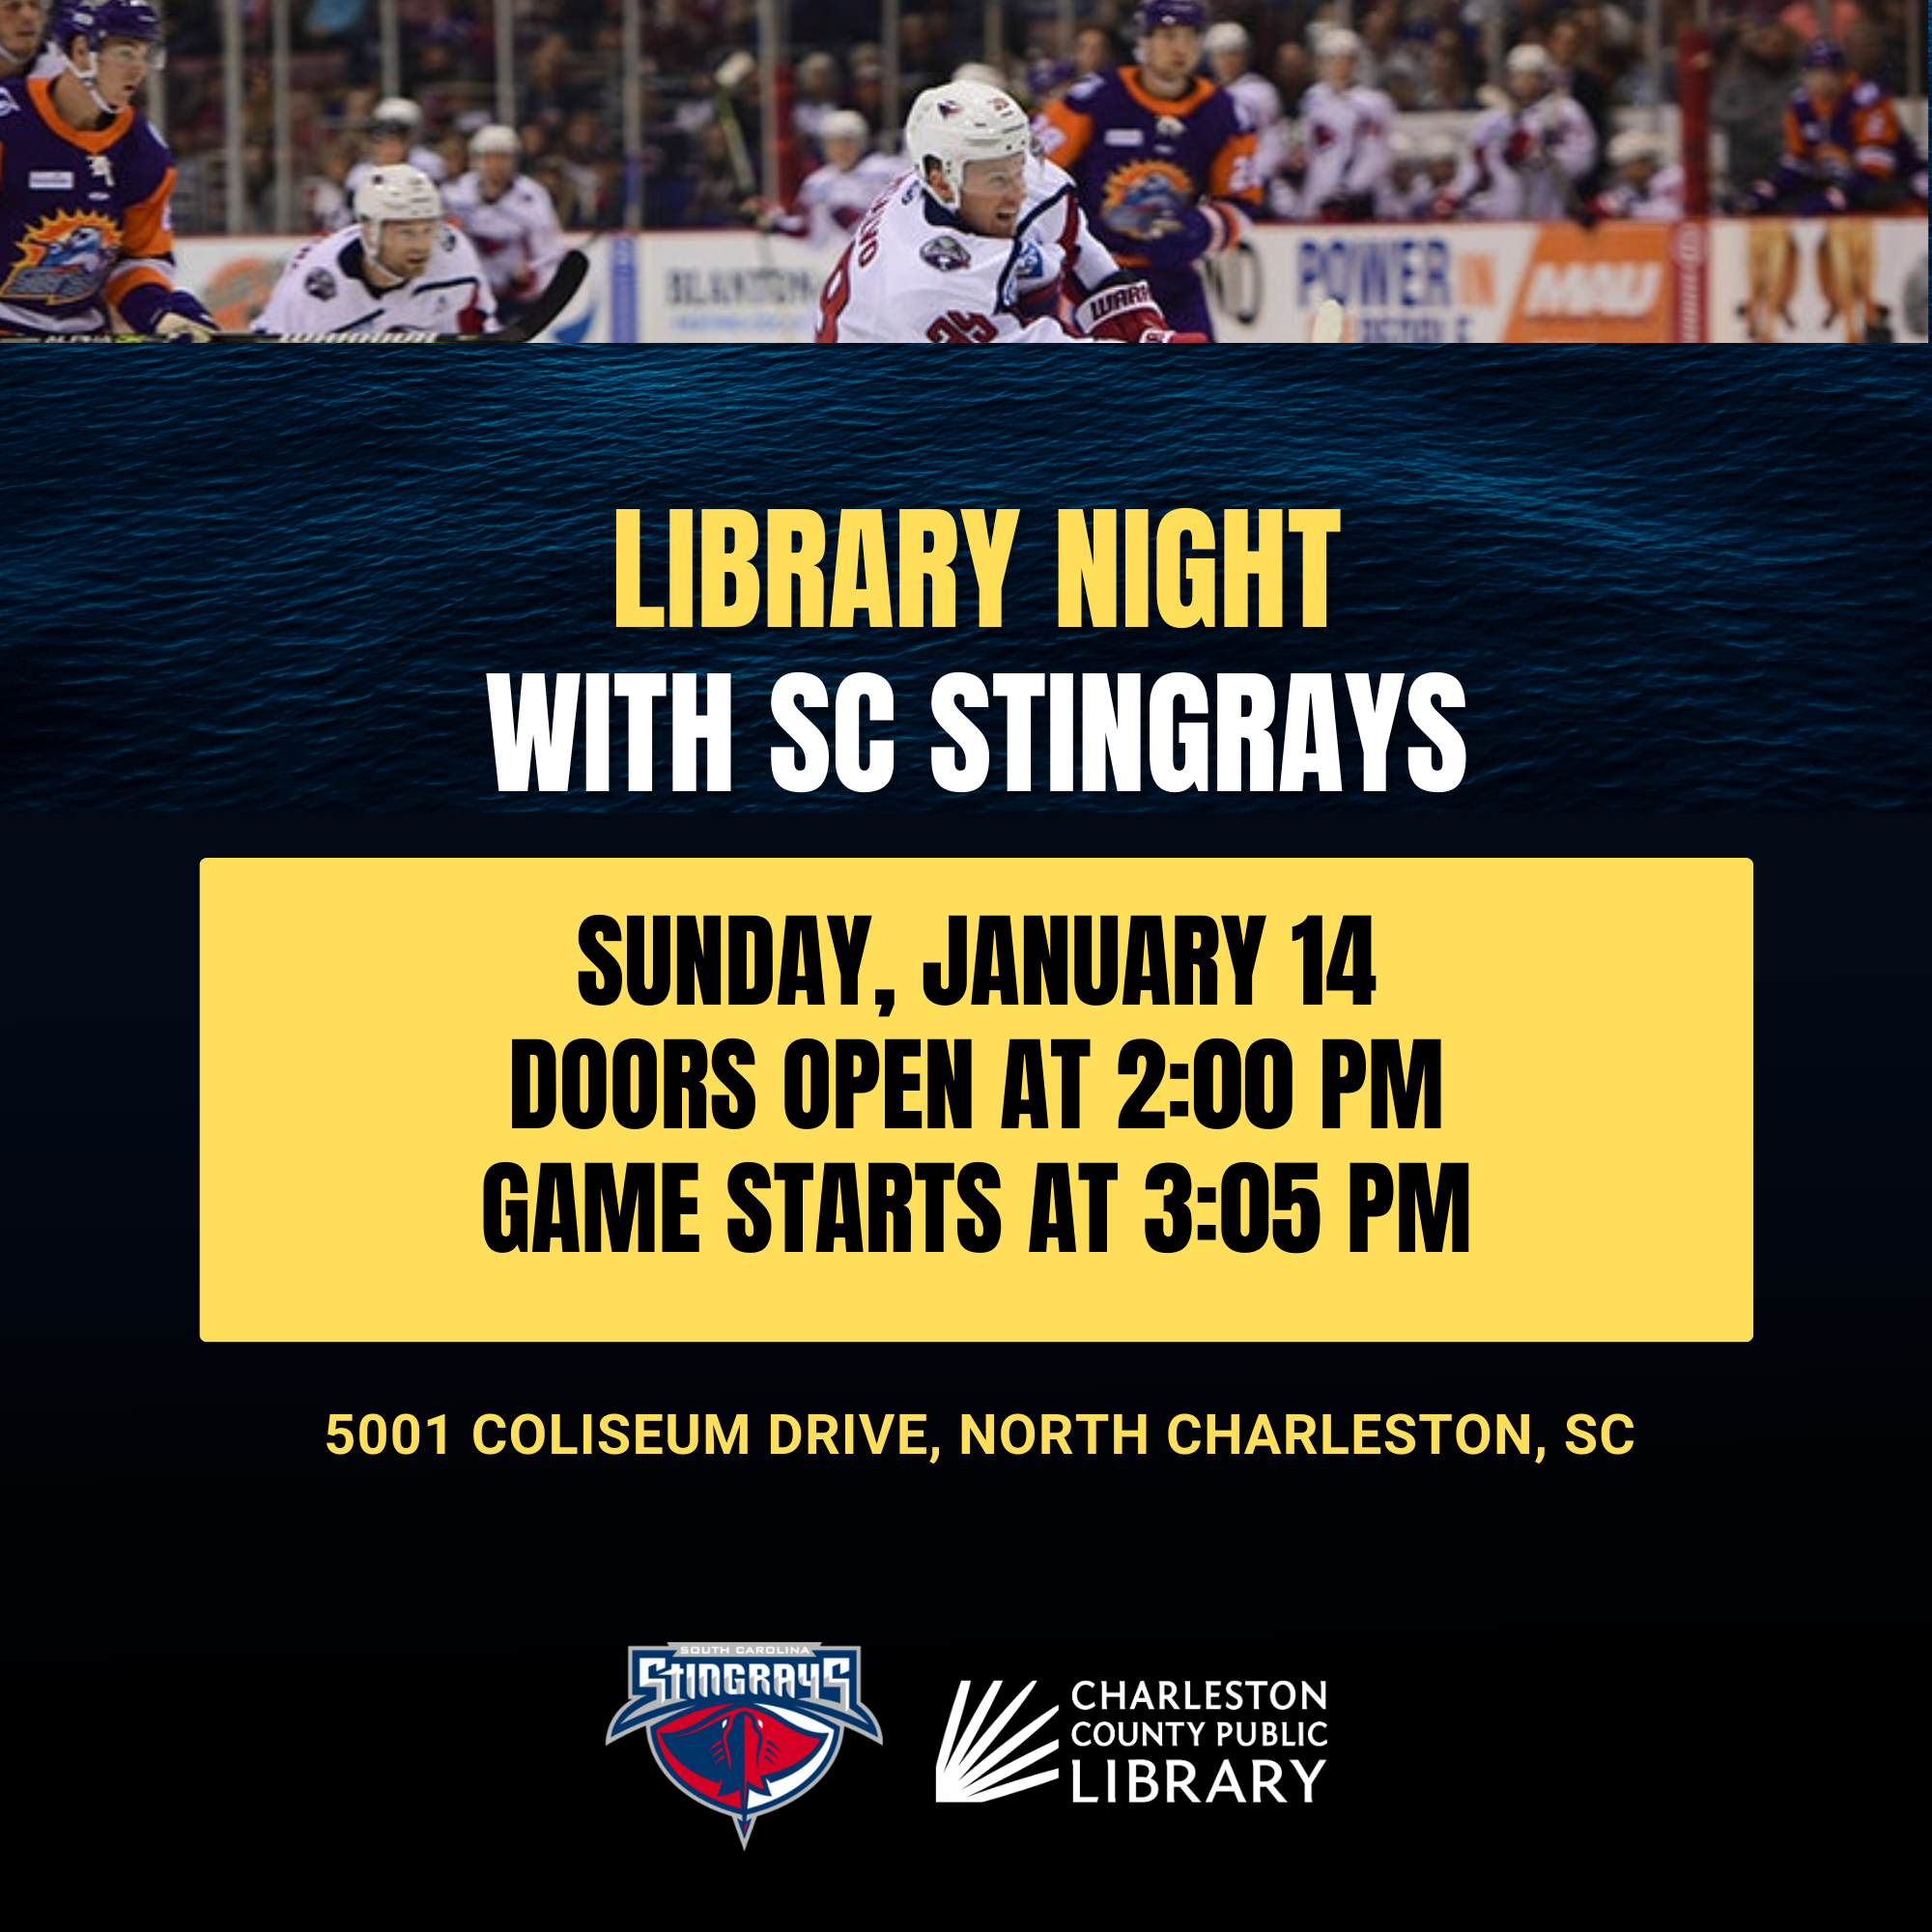 Join us for Library Night with the SC Stingrays 